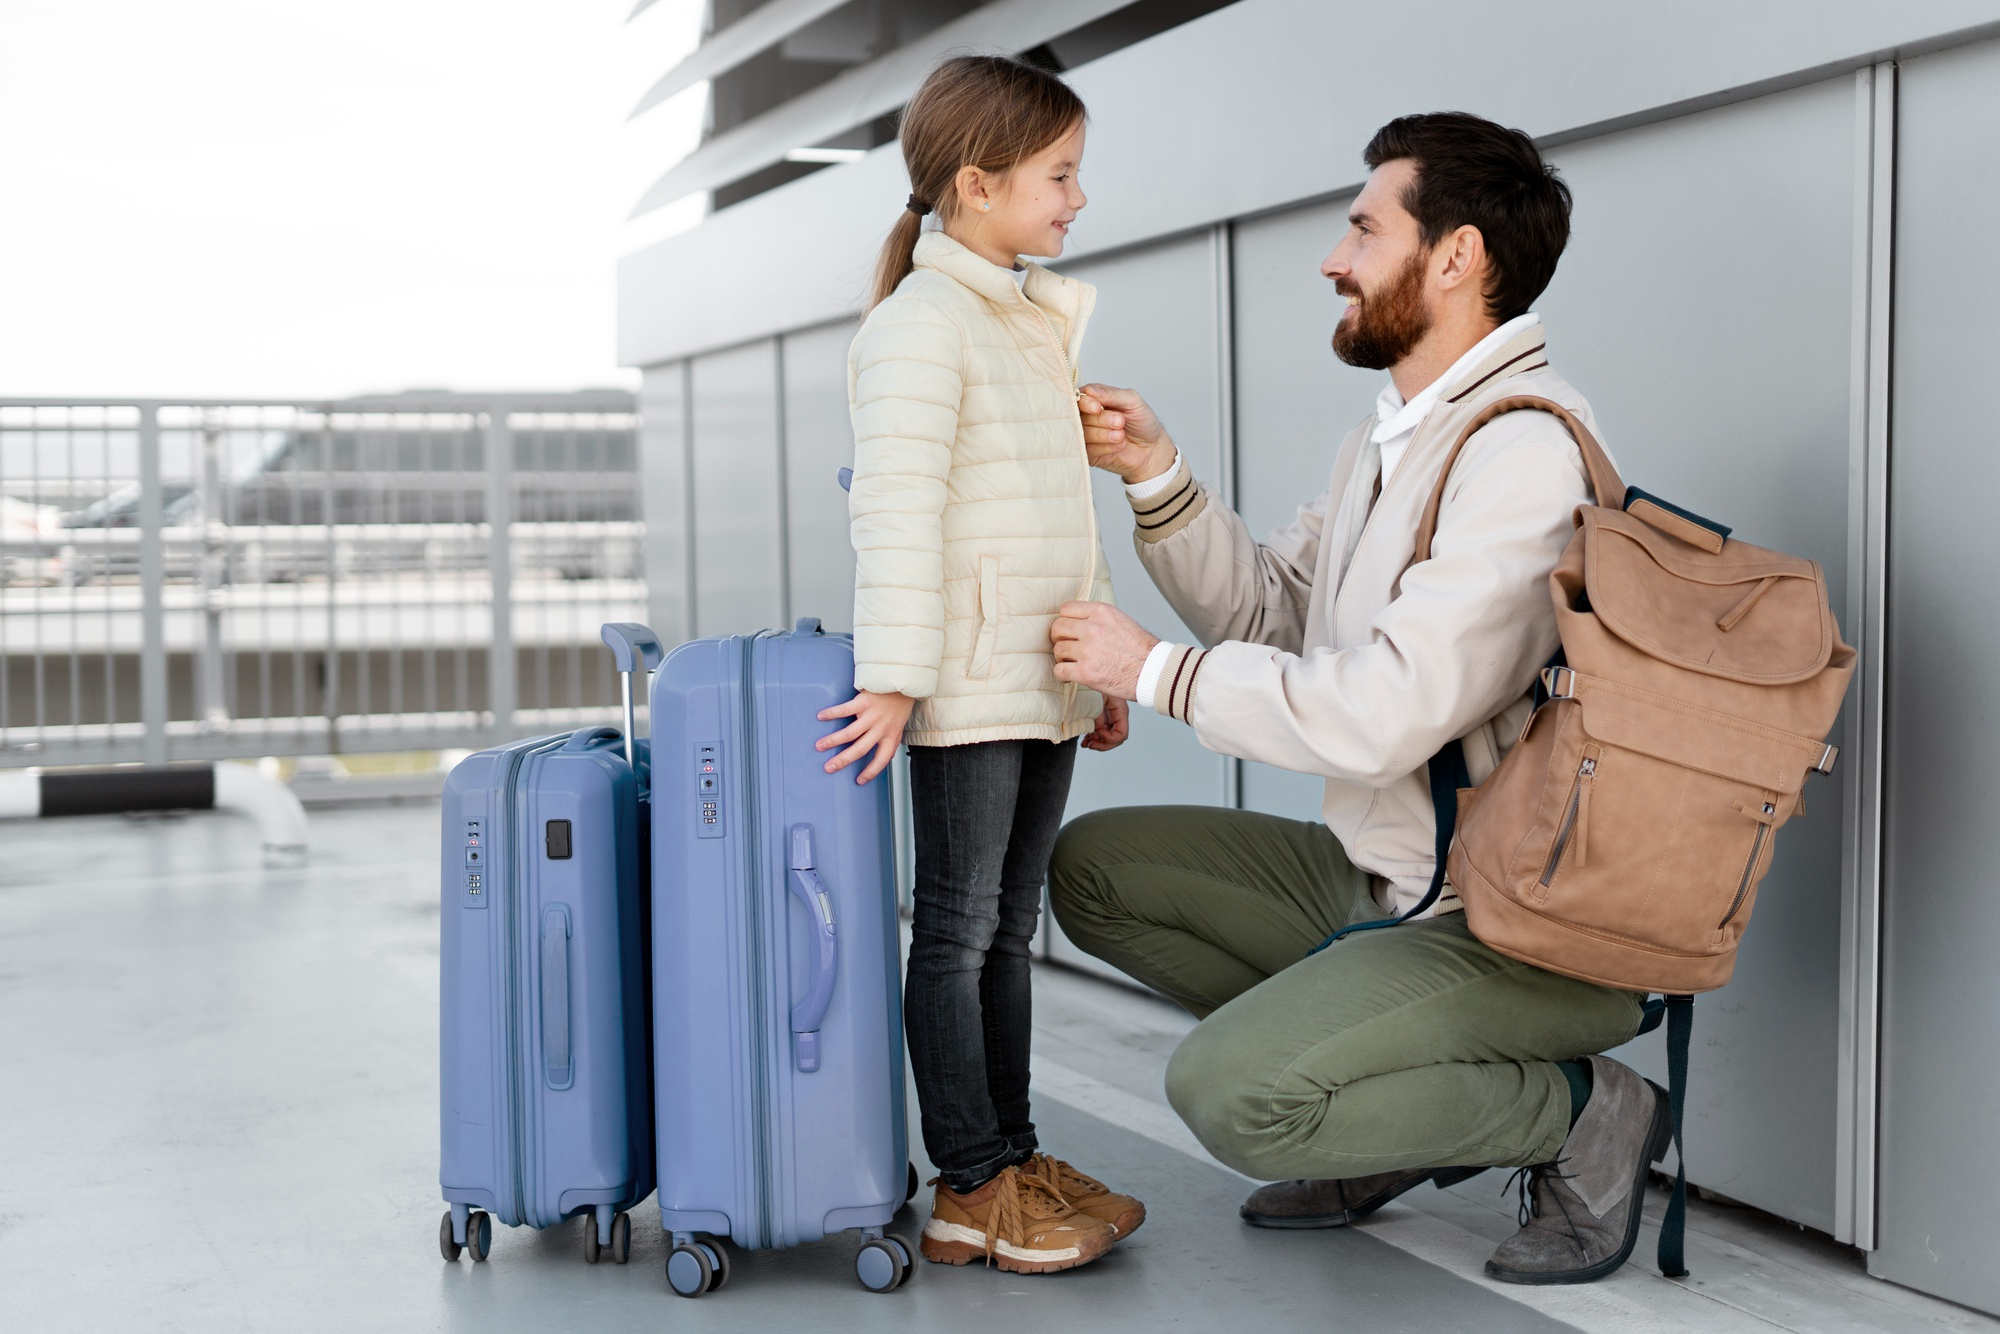 A father and his daughter ready for their trip with luggage on hand | Source: Freepik